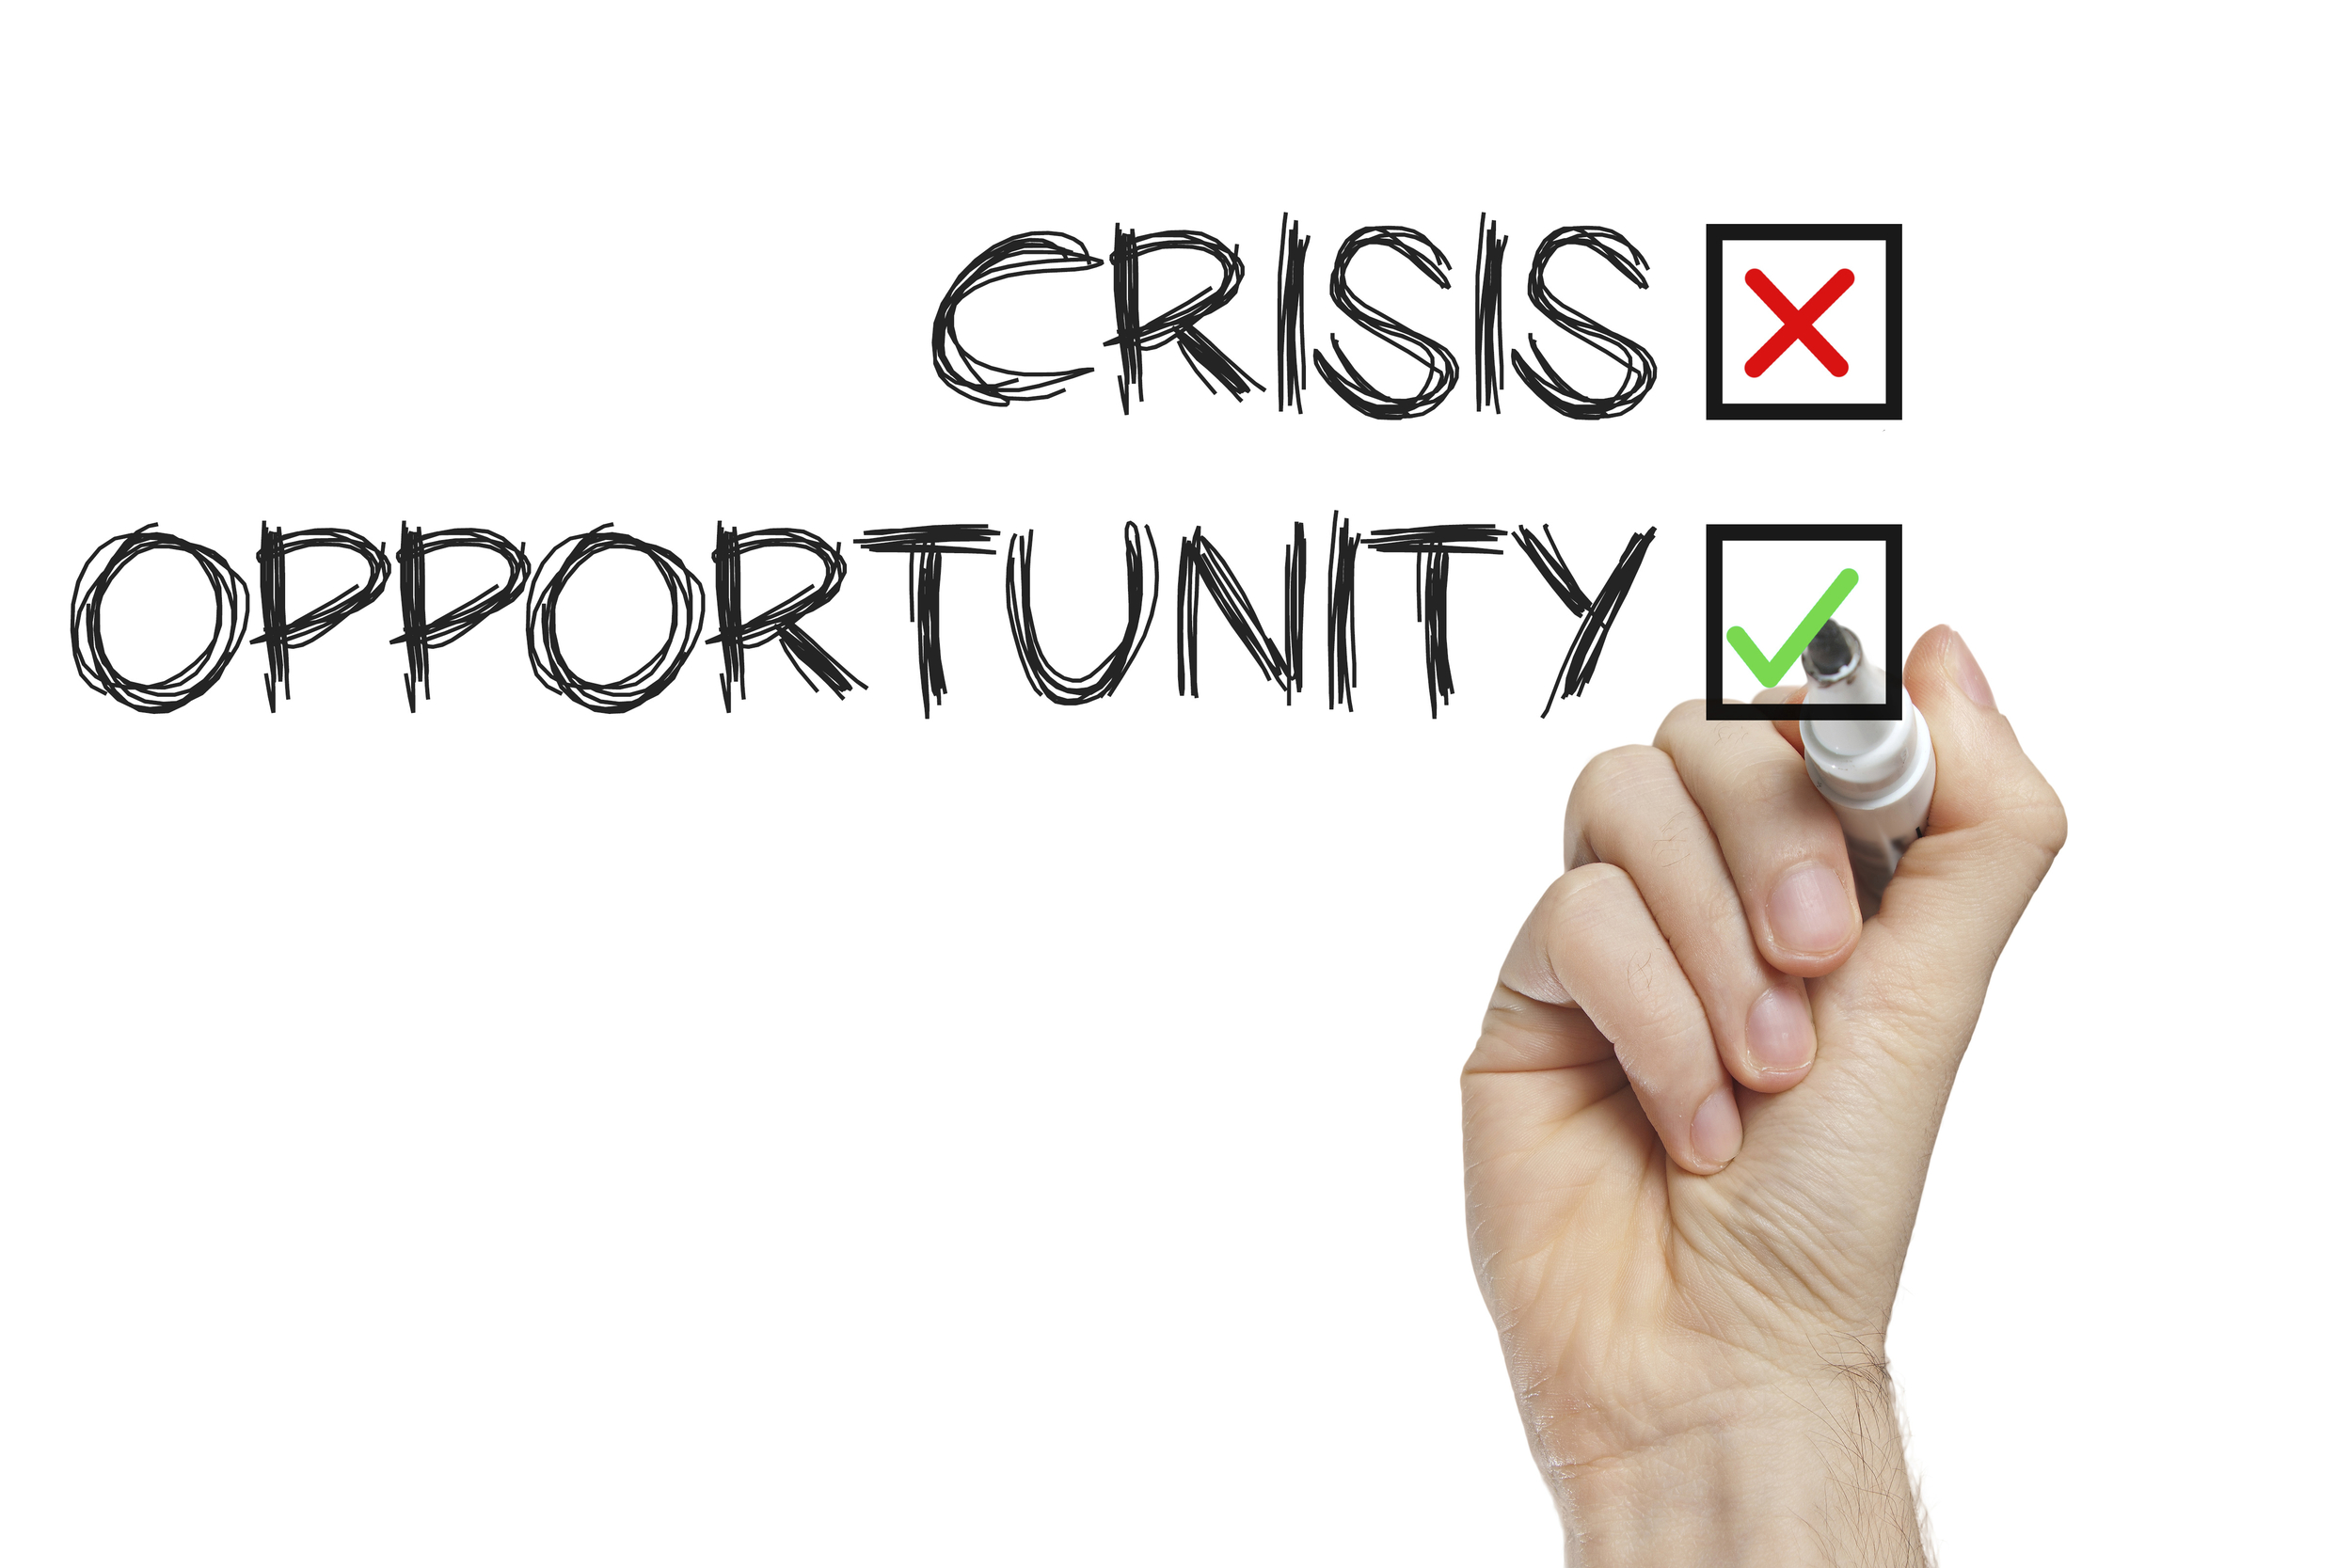 Turning Crisis into<br>Opportunity